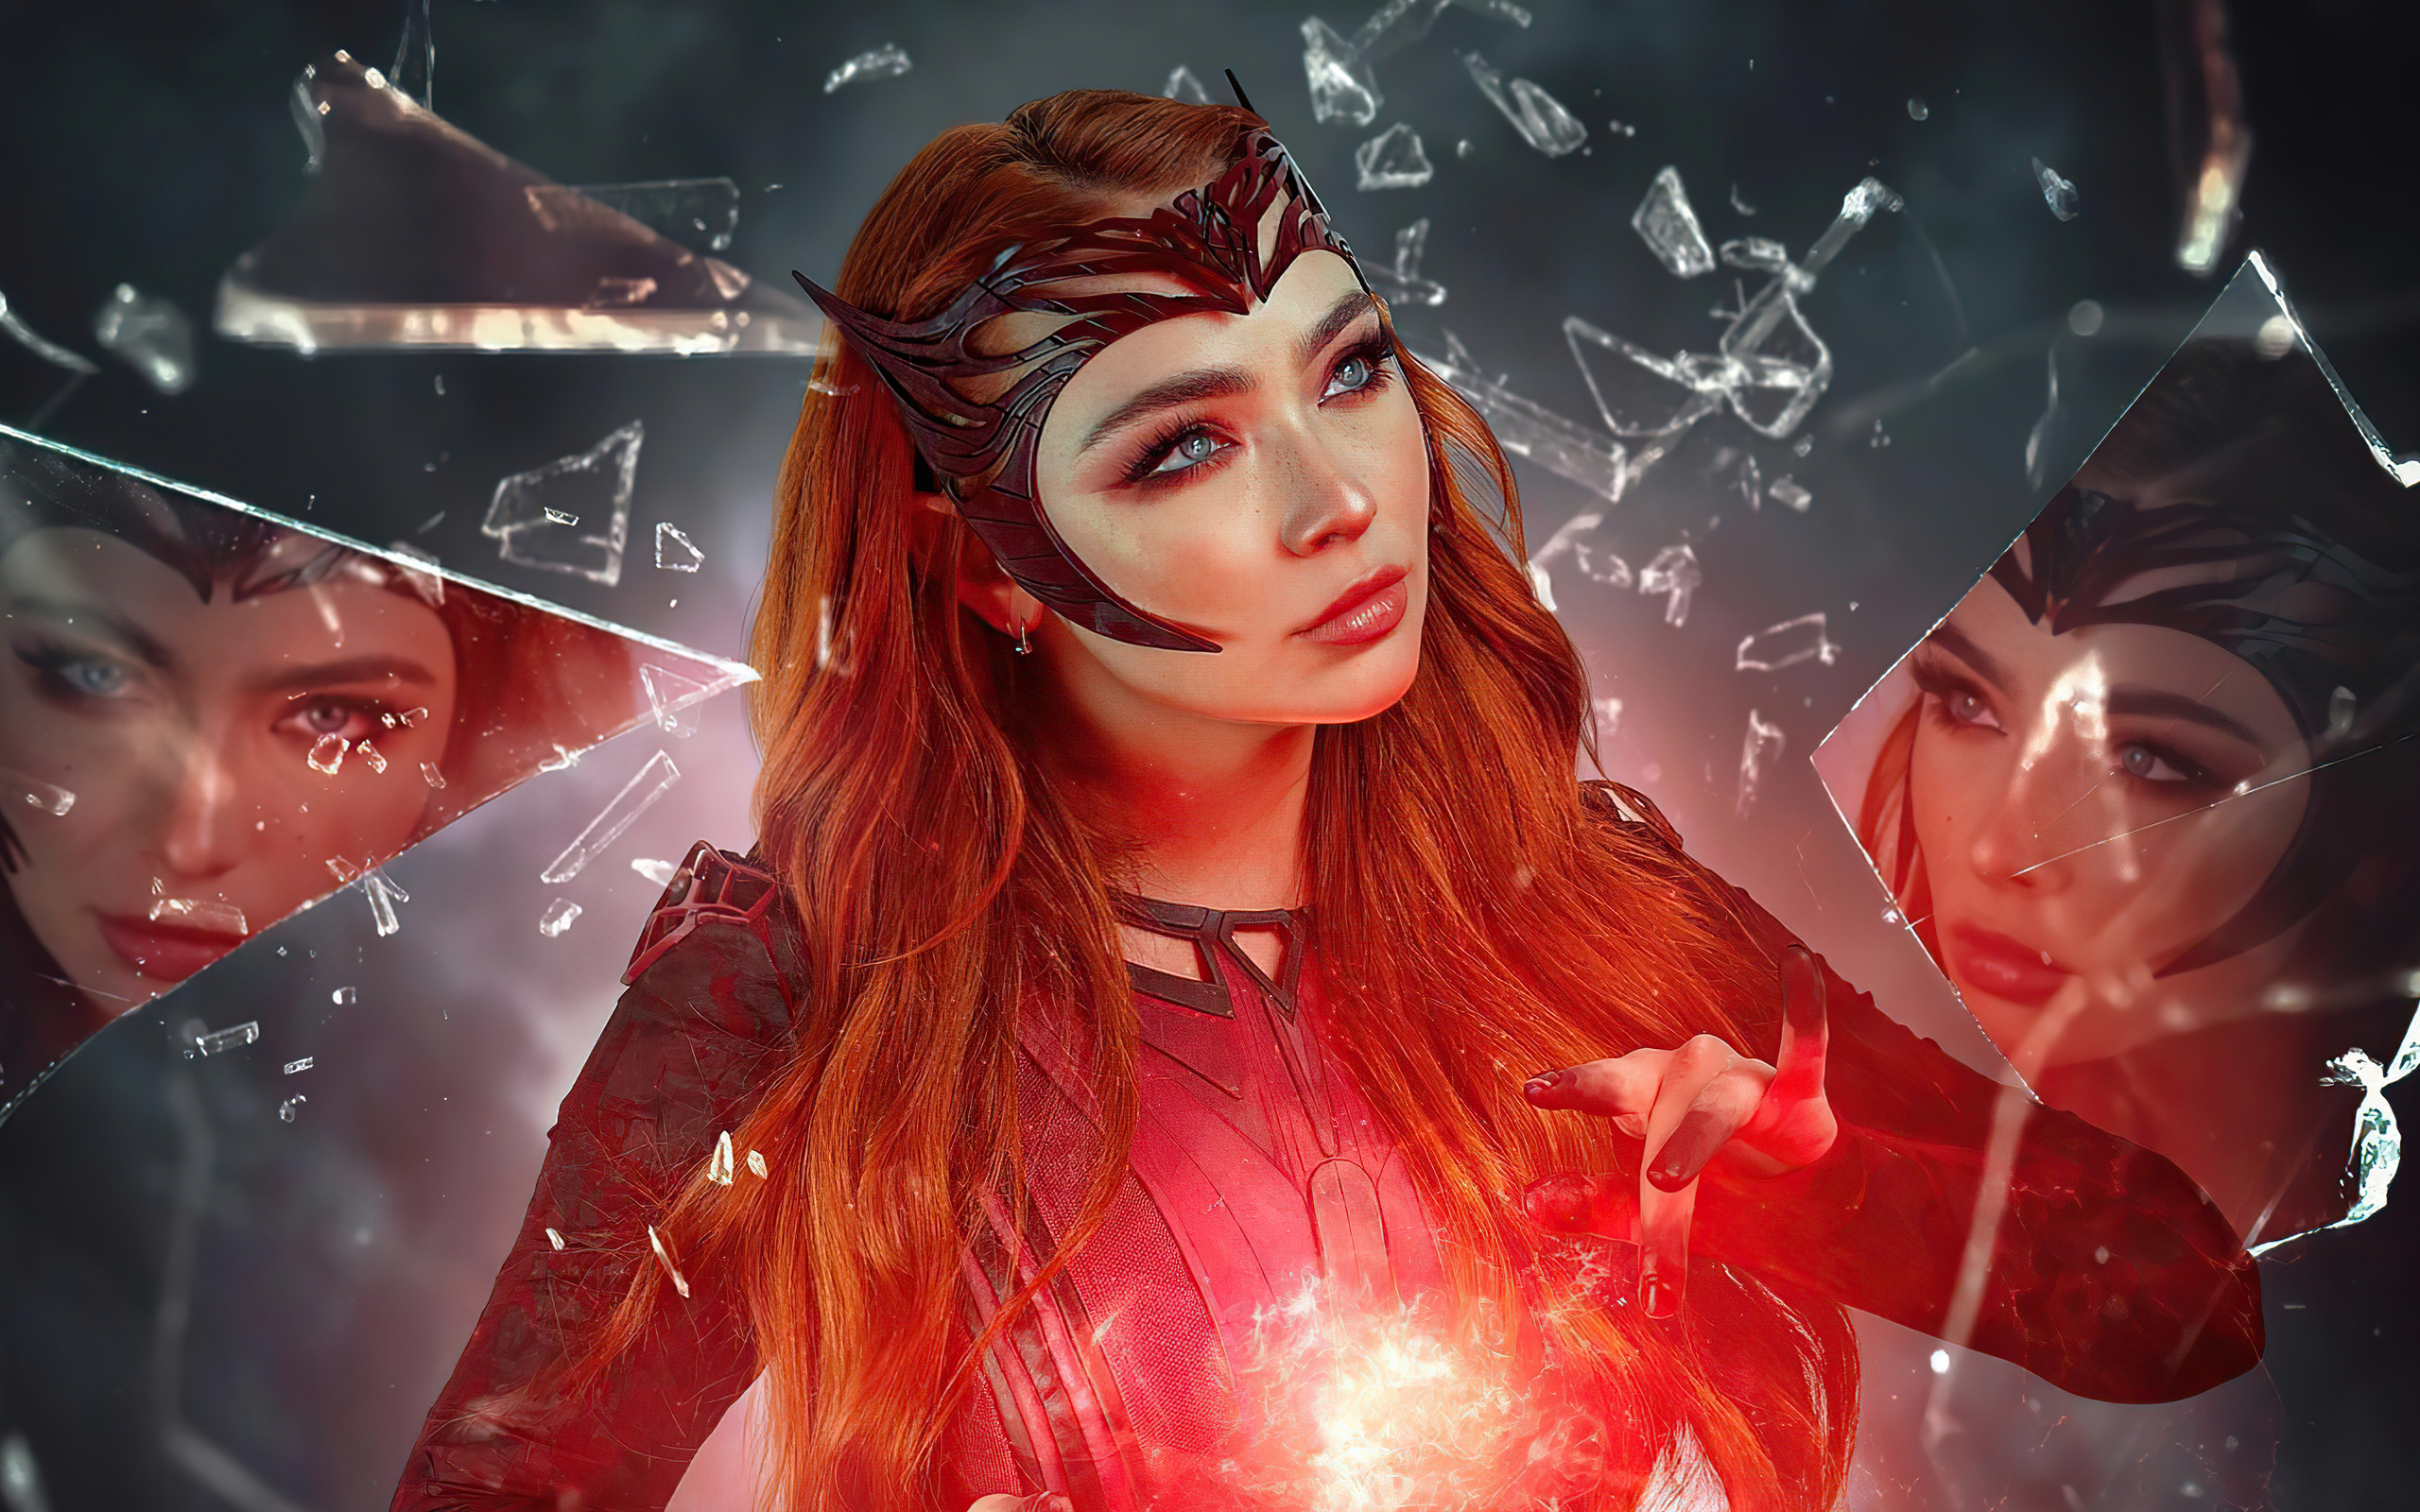 the-scarlet-witch-cosplay-5k-9f.jpg